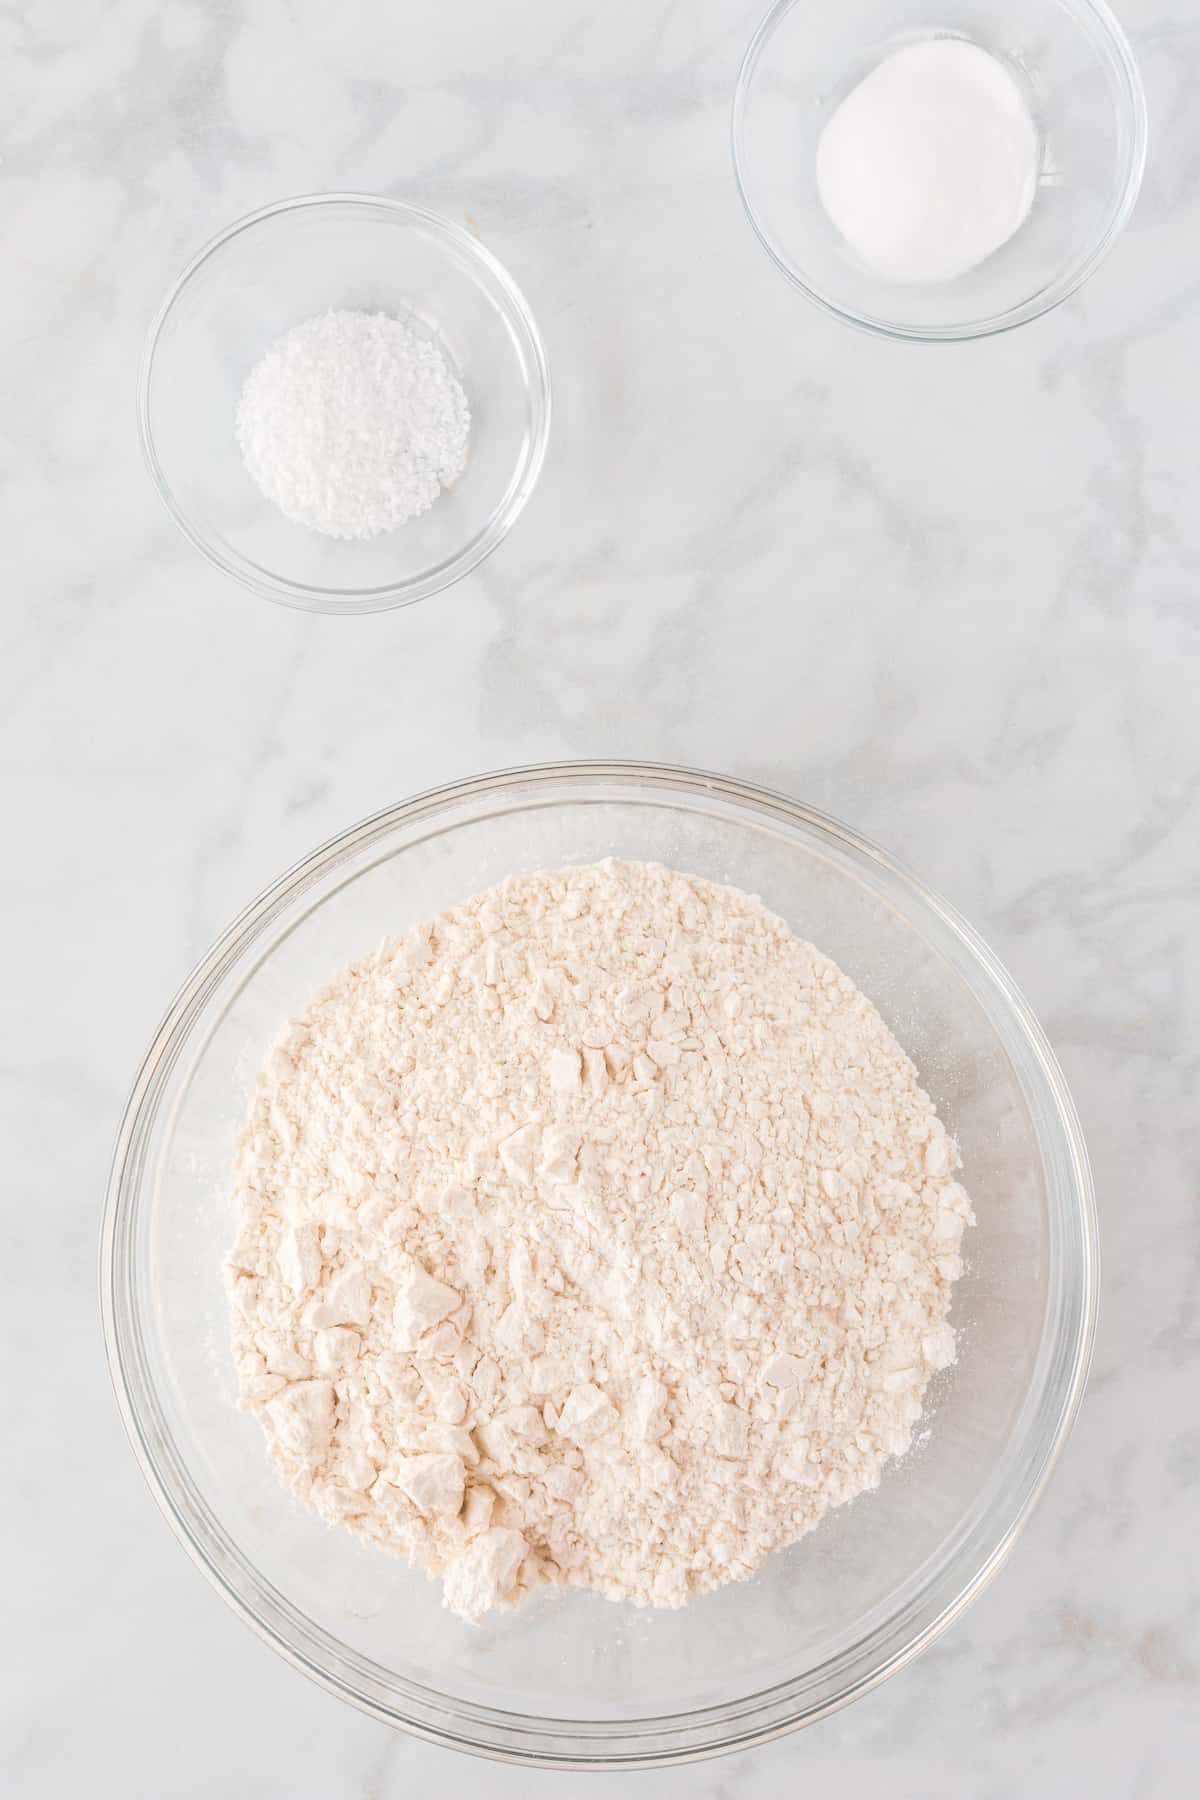 flour and dry ingredients in small glass bowls